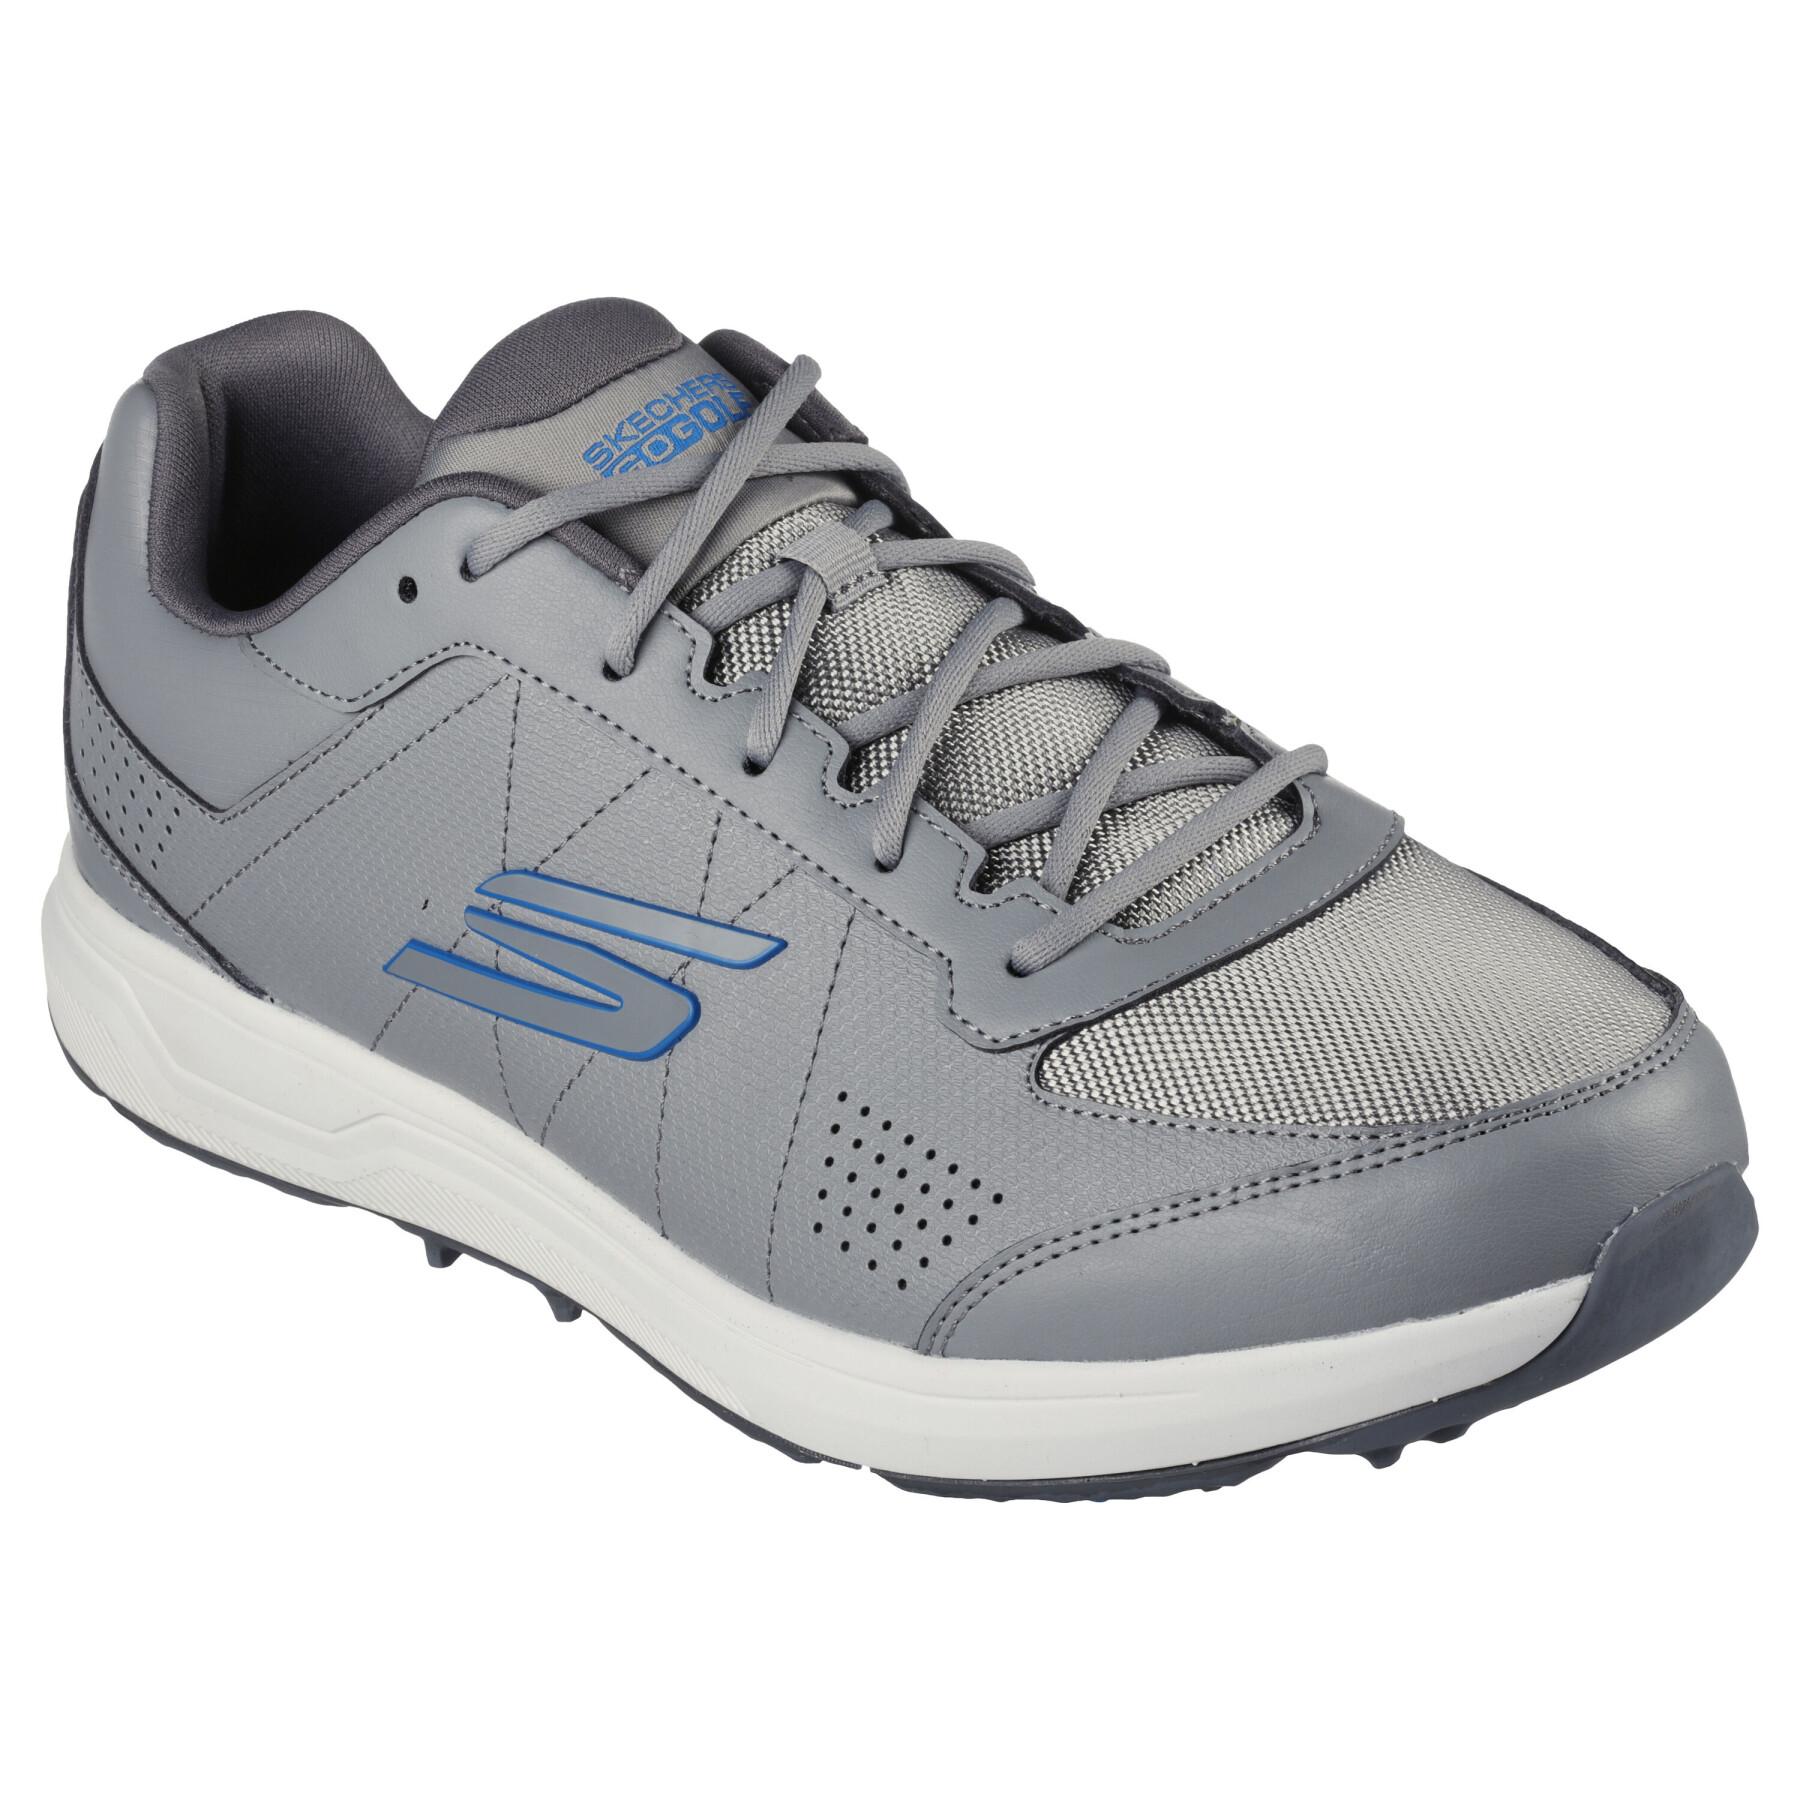 Spikeless golf shoes Skechers GO GOLF Prime